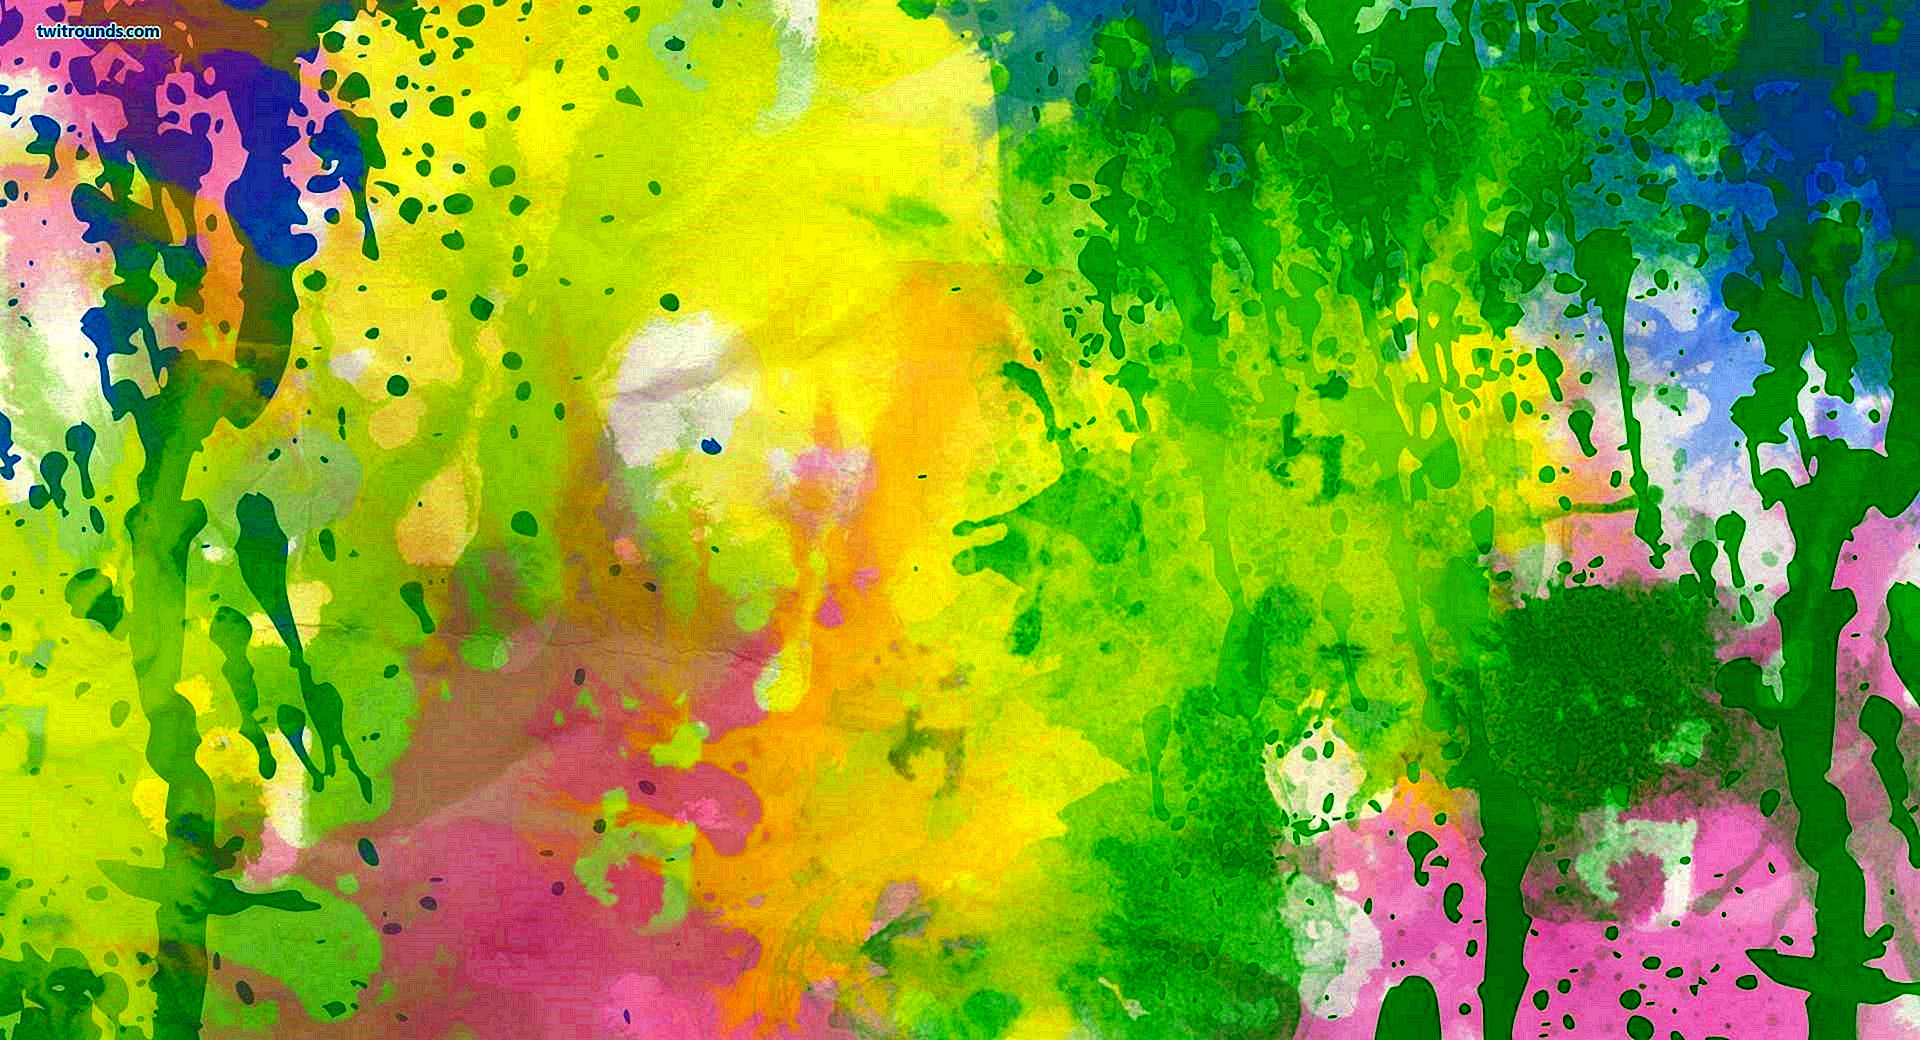 Yellow Green Watercolor Background Wallpaper